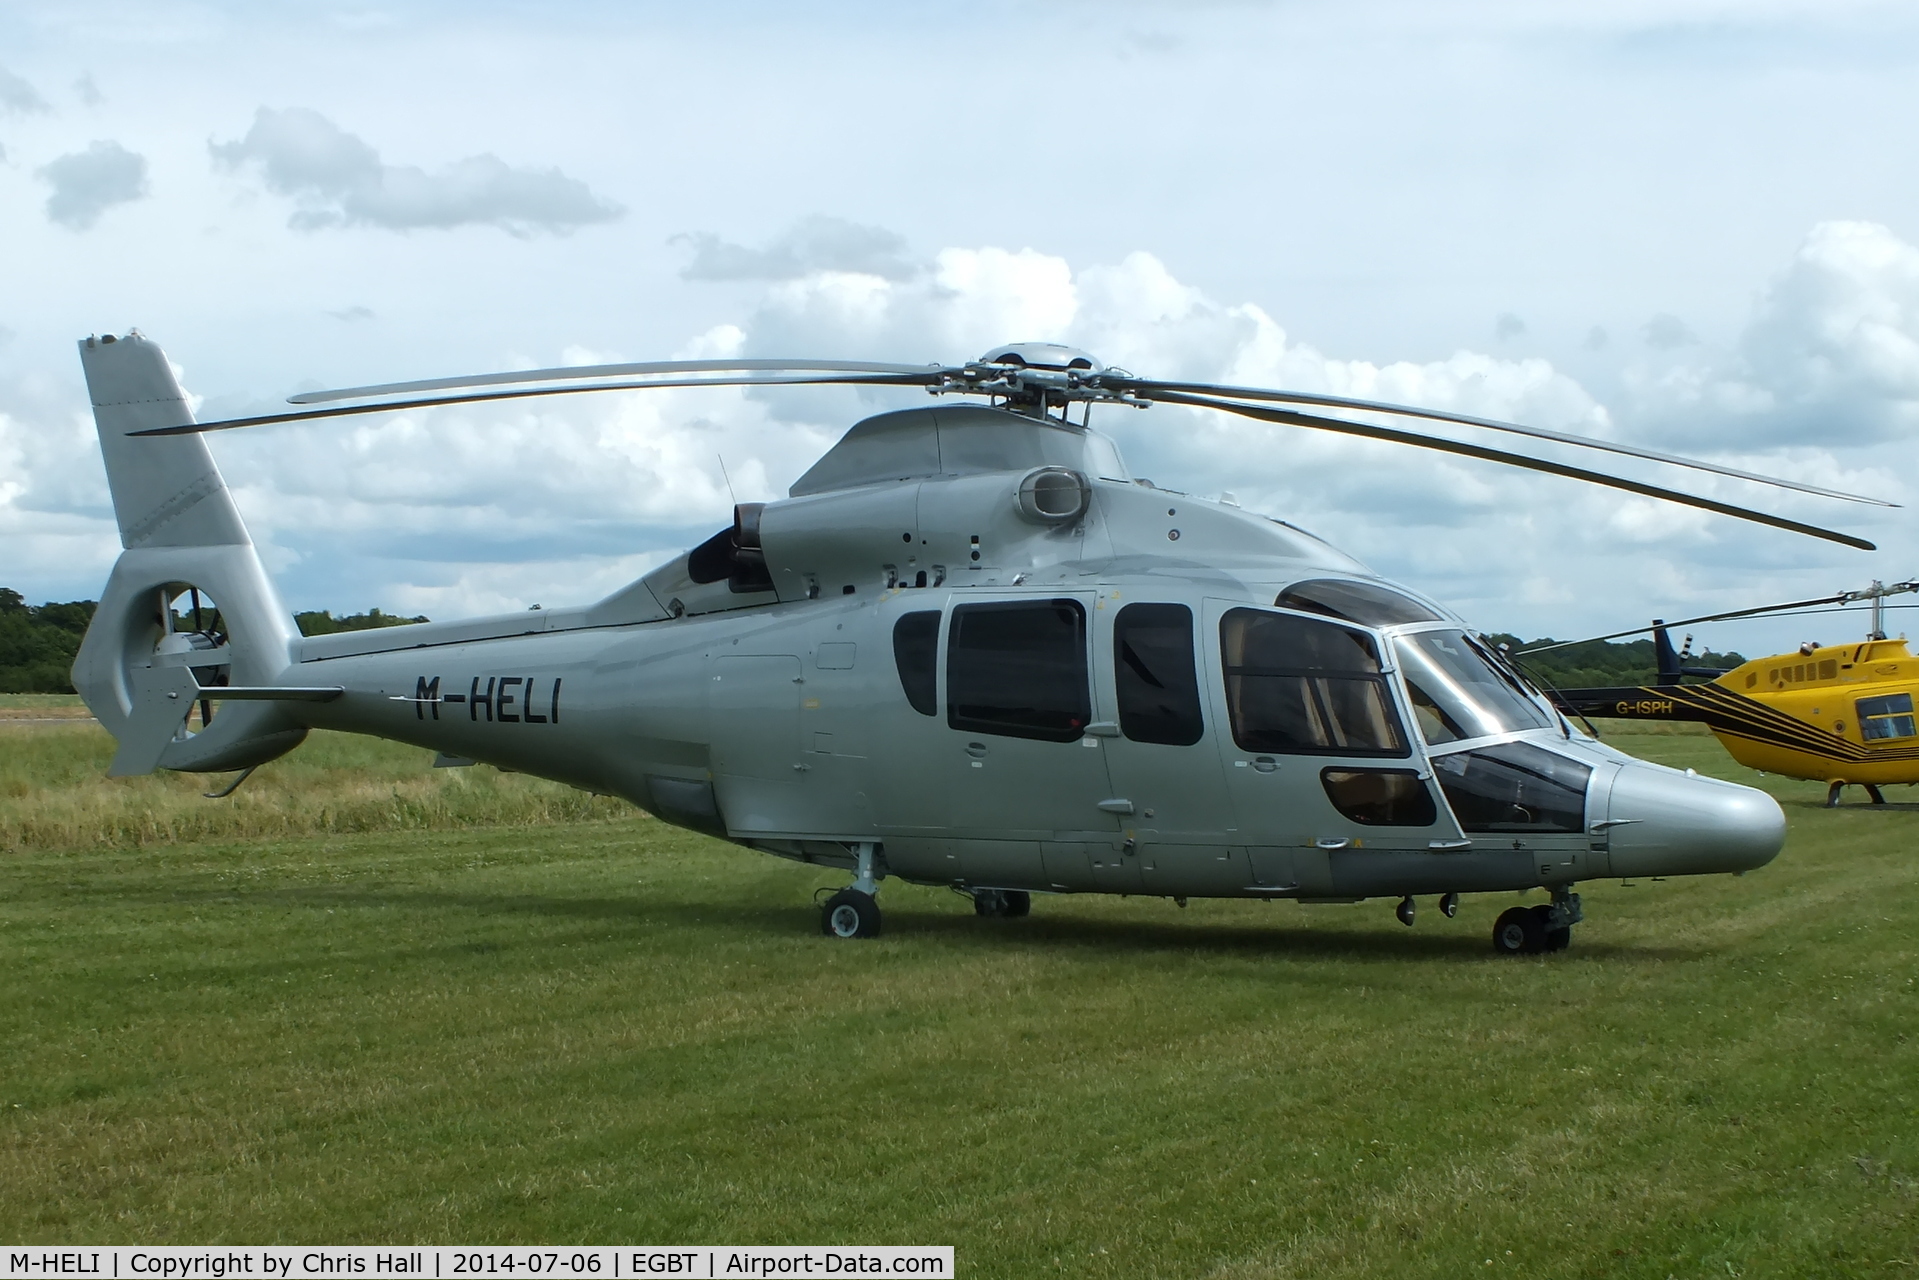 M-HELI, Eurocopter EC-155B-1 C/N 6898, ferrying race fans to the British F1 Grand Prix at Silverstone